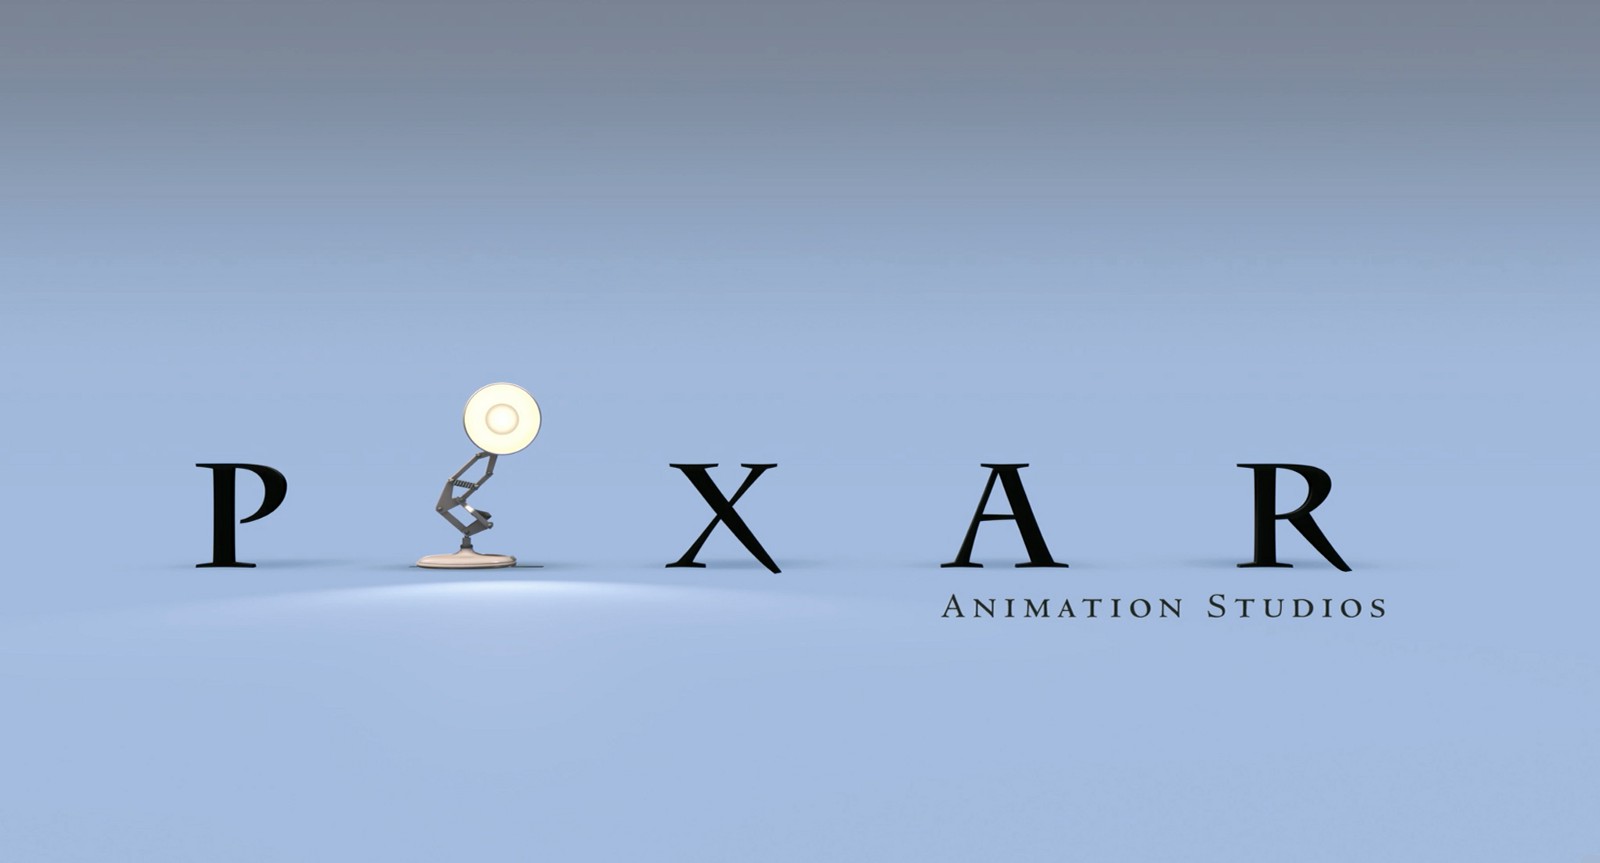 Lee Unkrich Leaves Pixar After More Than Two Decades With The Studio